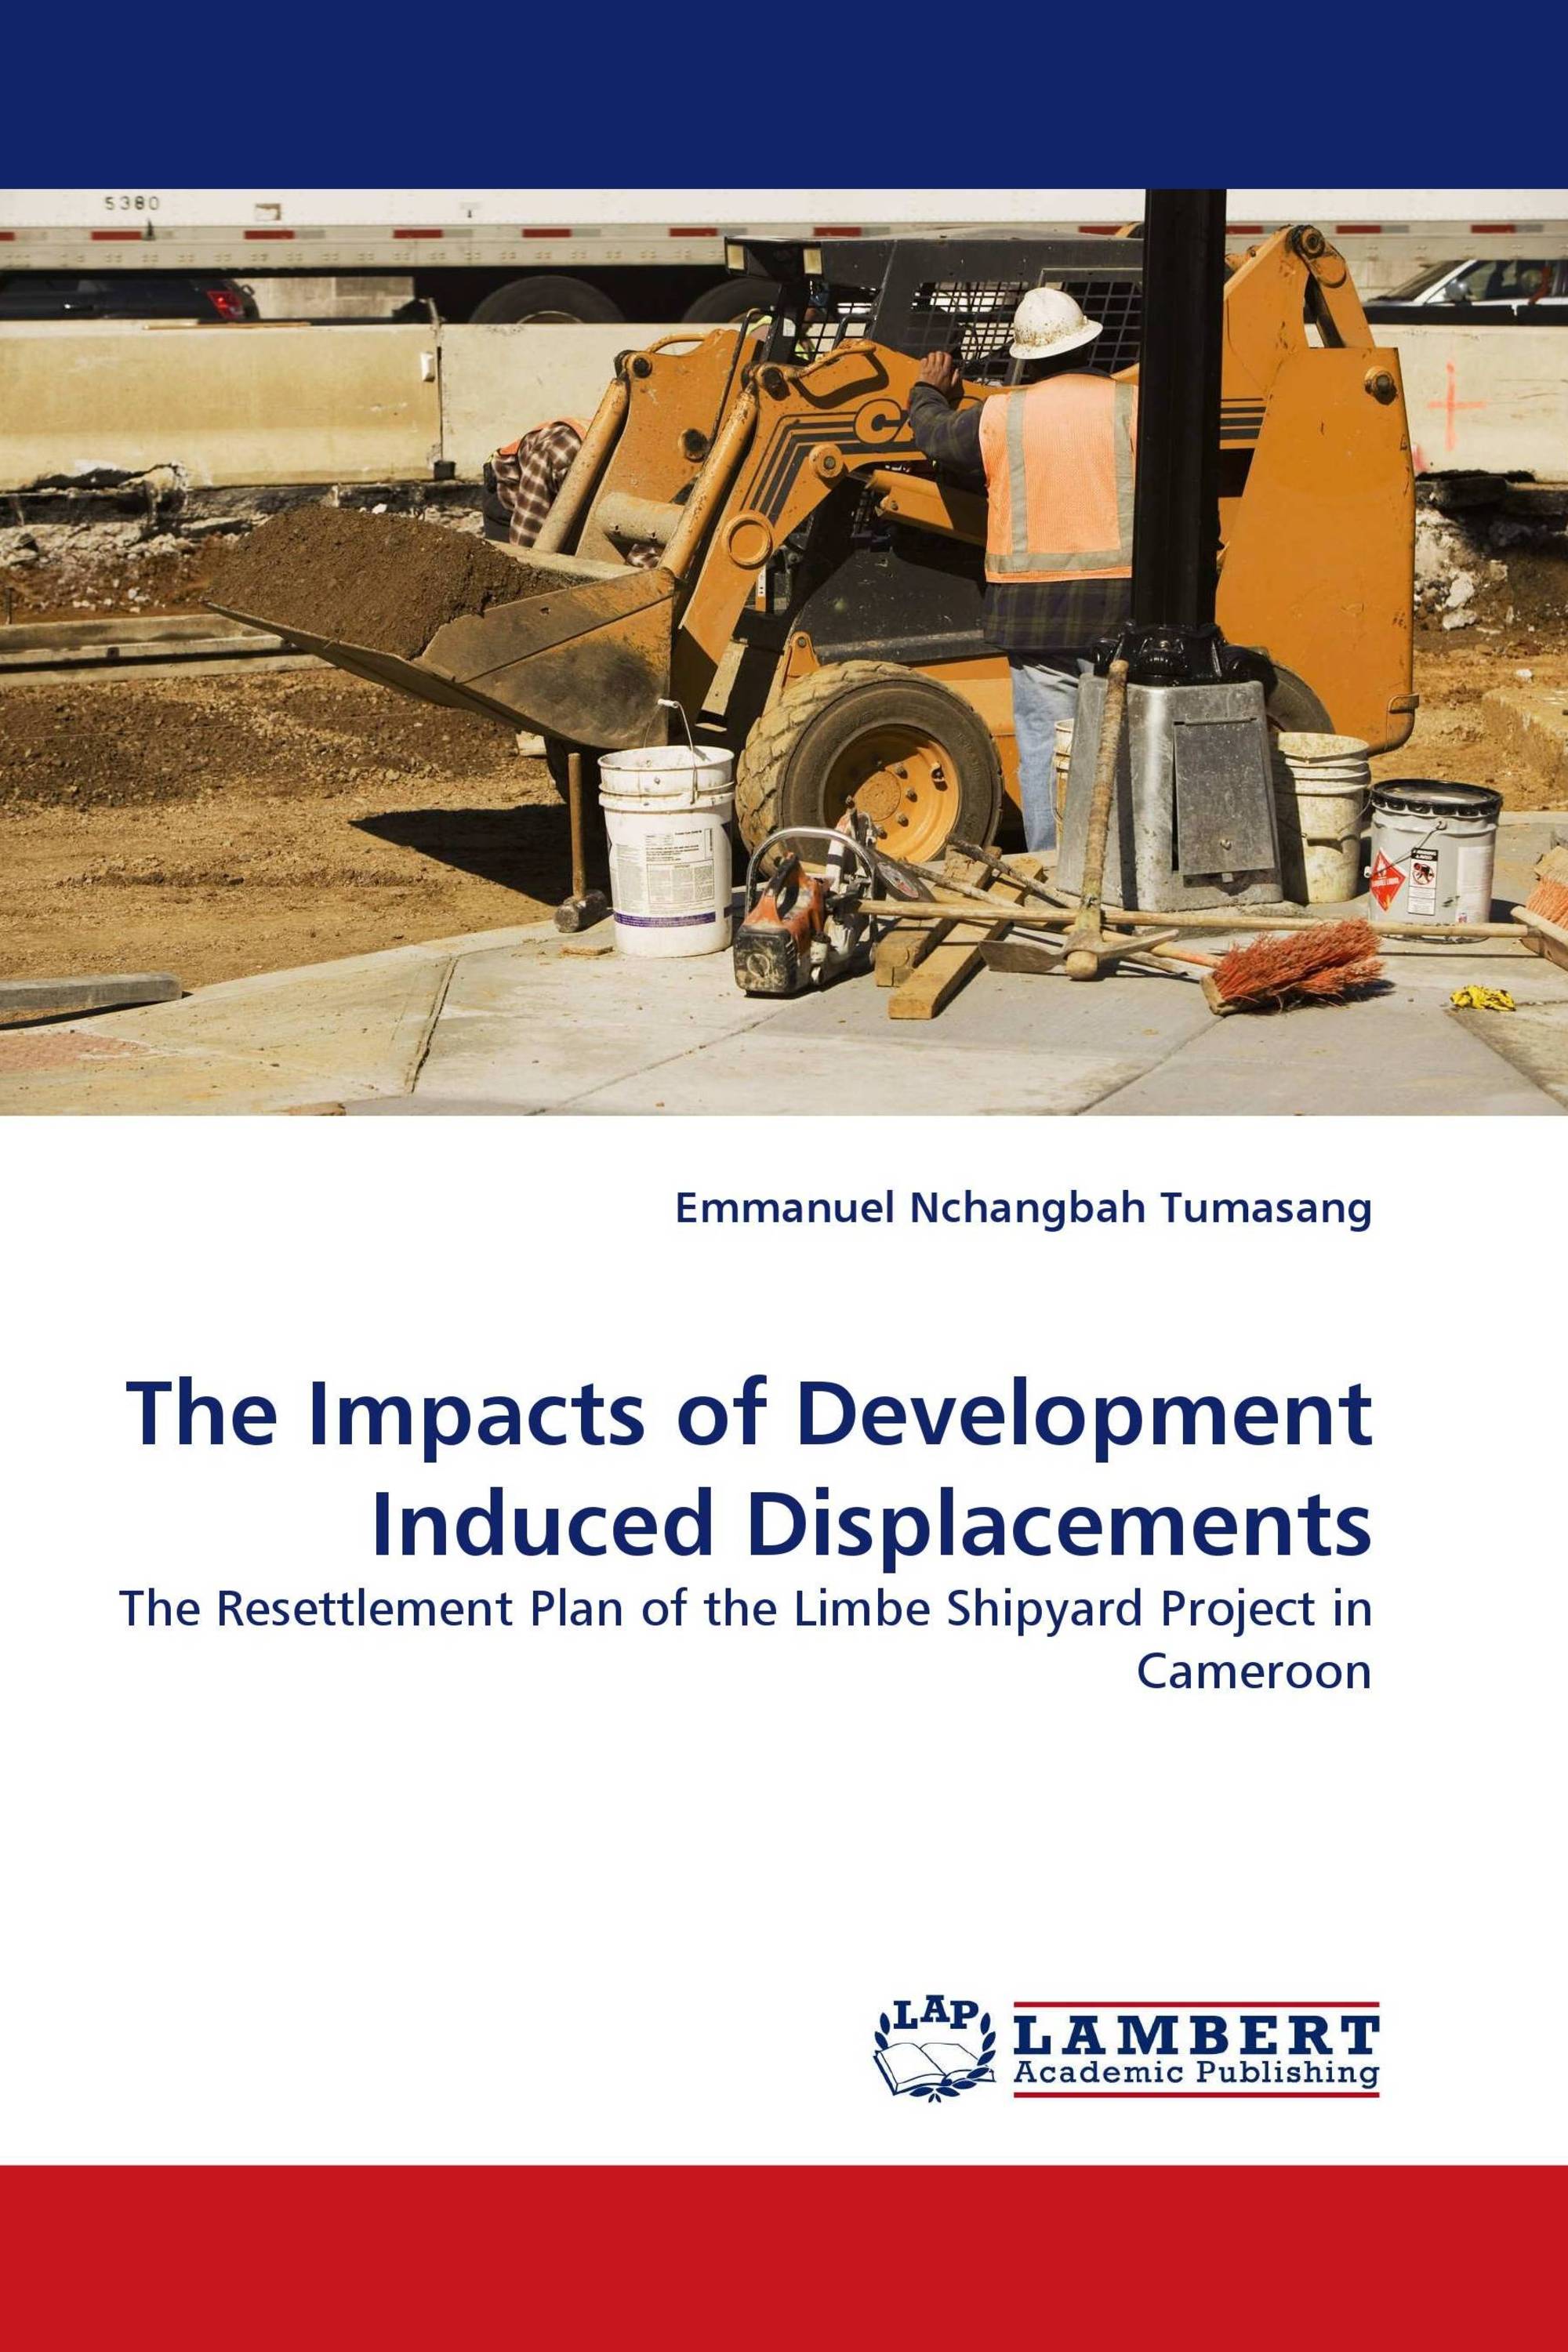 The Impacts of Development Induced Displacements